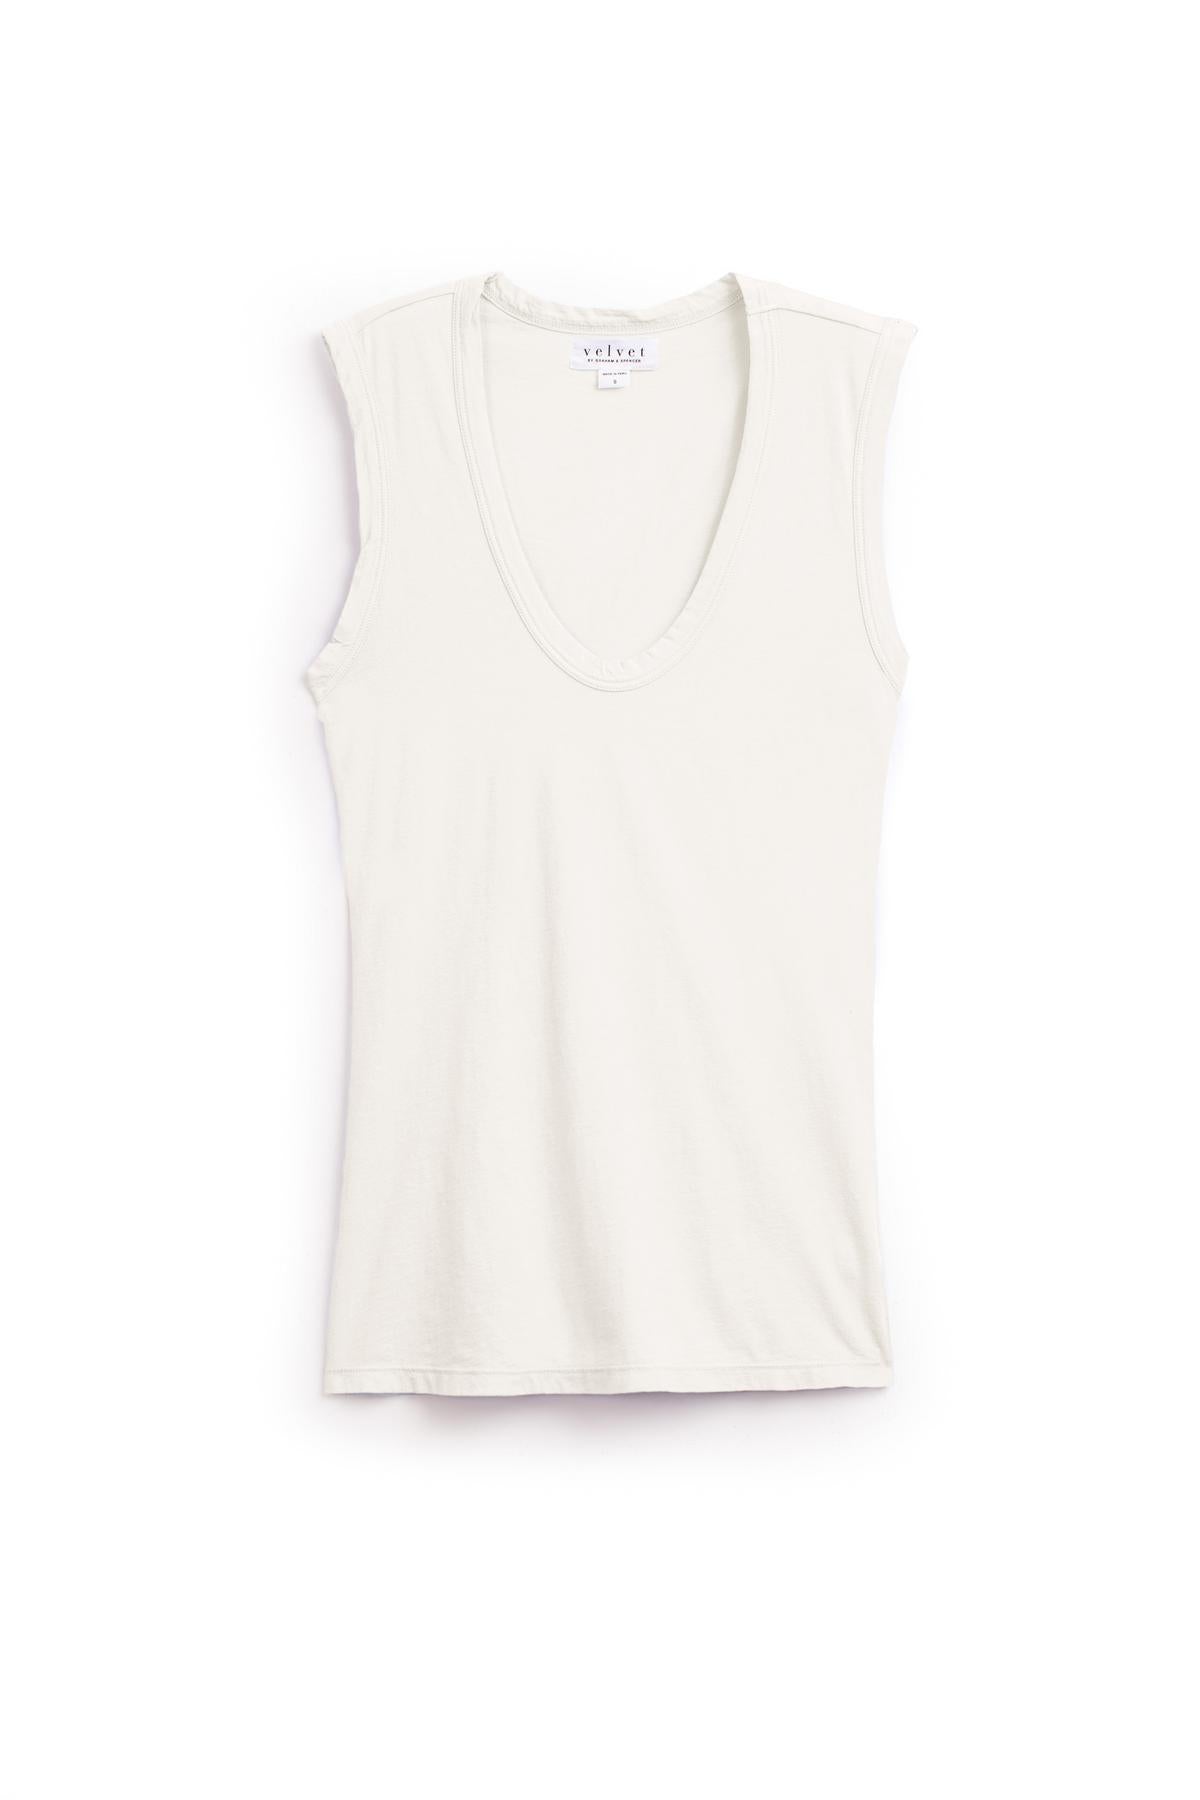 A soft and wearable Velvet by Graham & Spencer ESTINA GAUZY WHISPER FITTED TANK TOP on a white background.-36131064217793